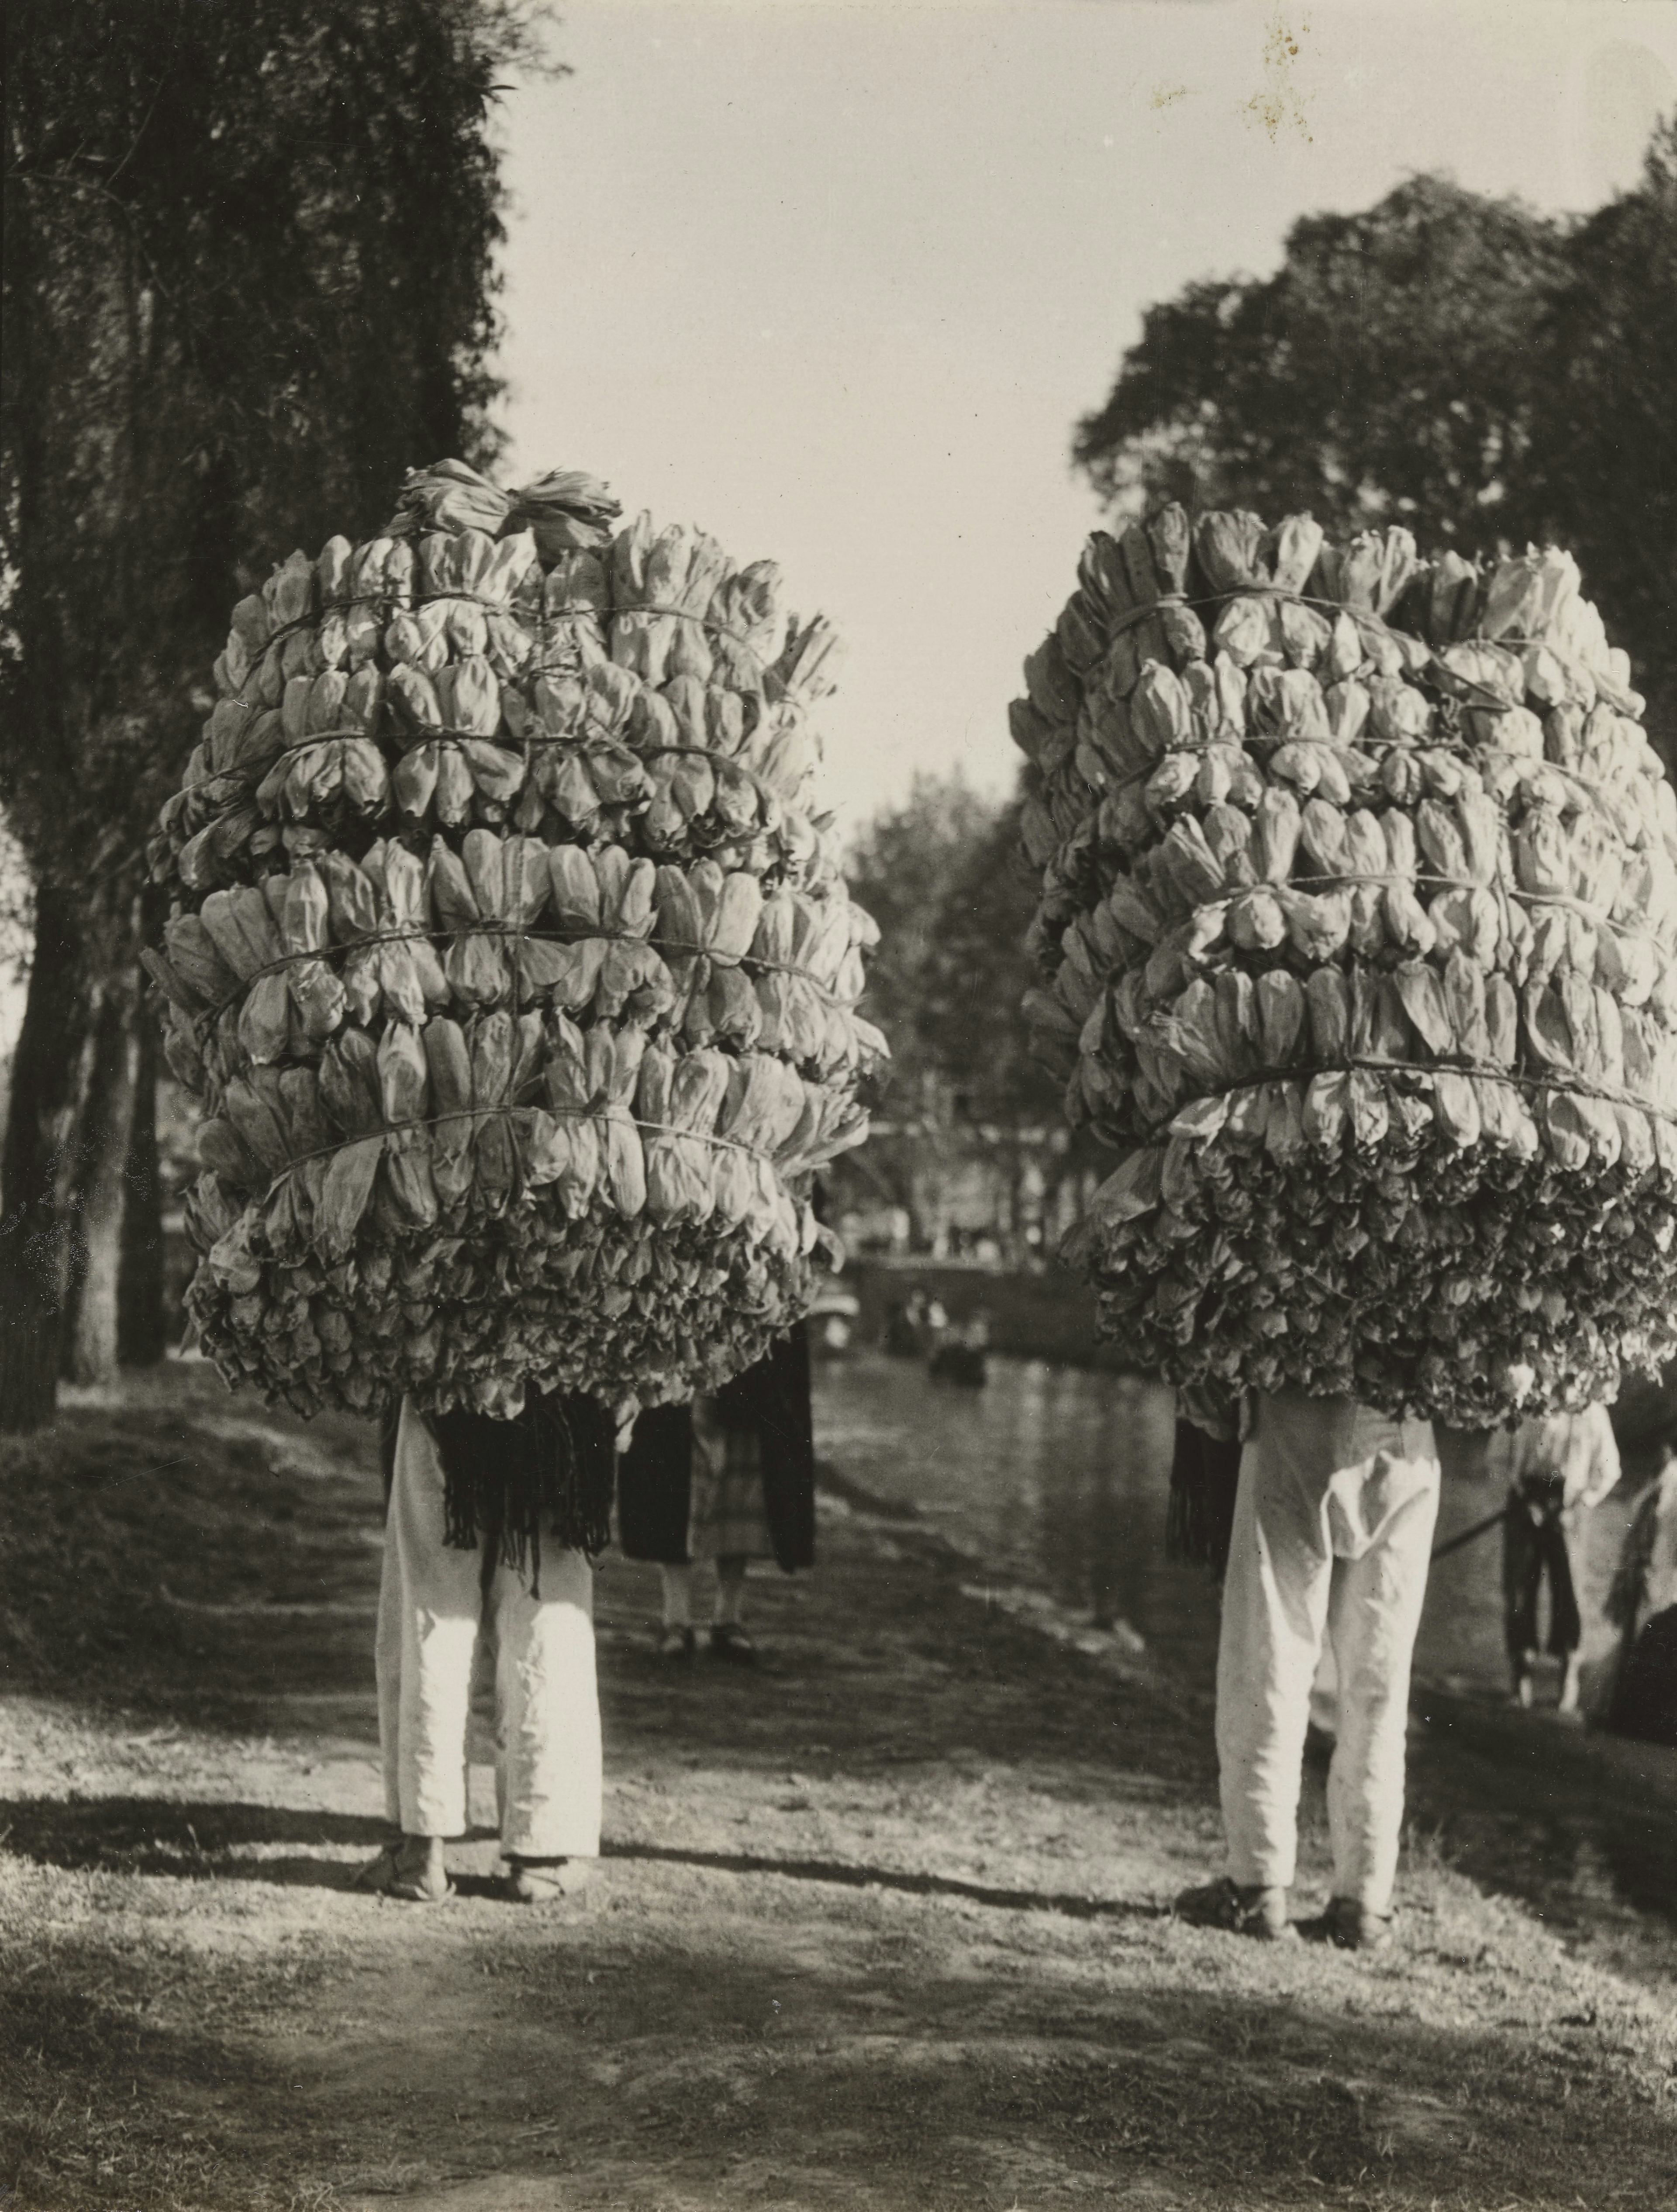 Indians carrying loads of corn husks for the making of “tamales’